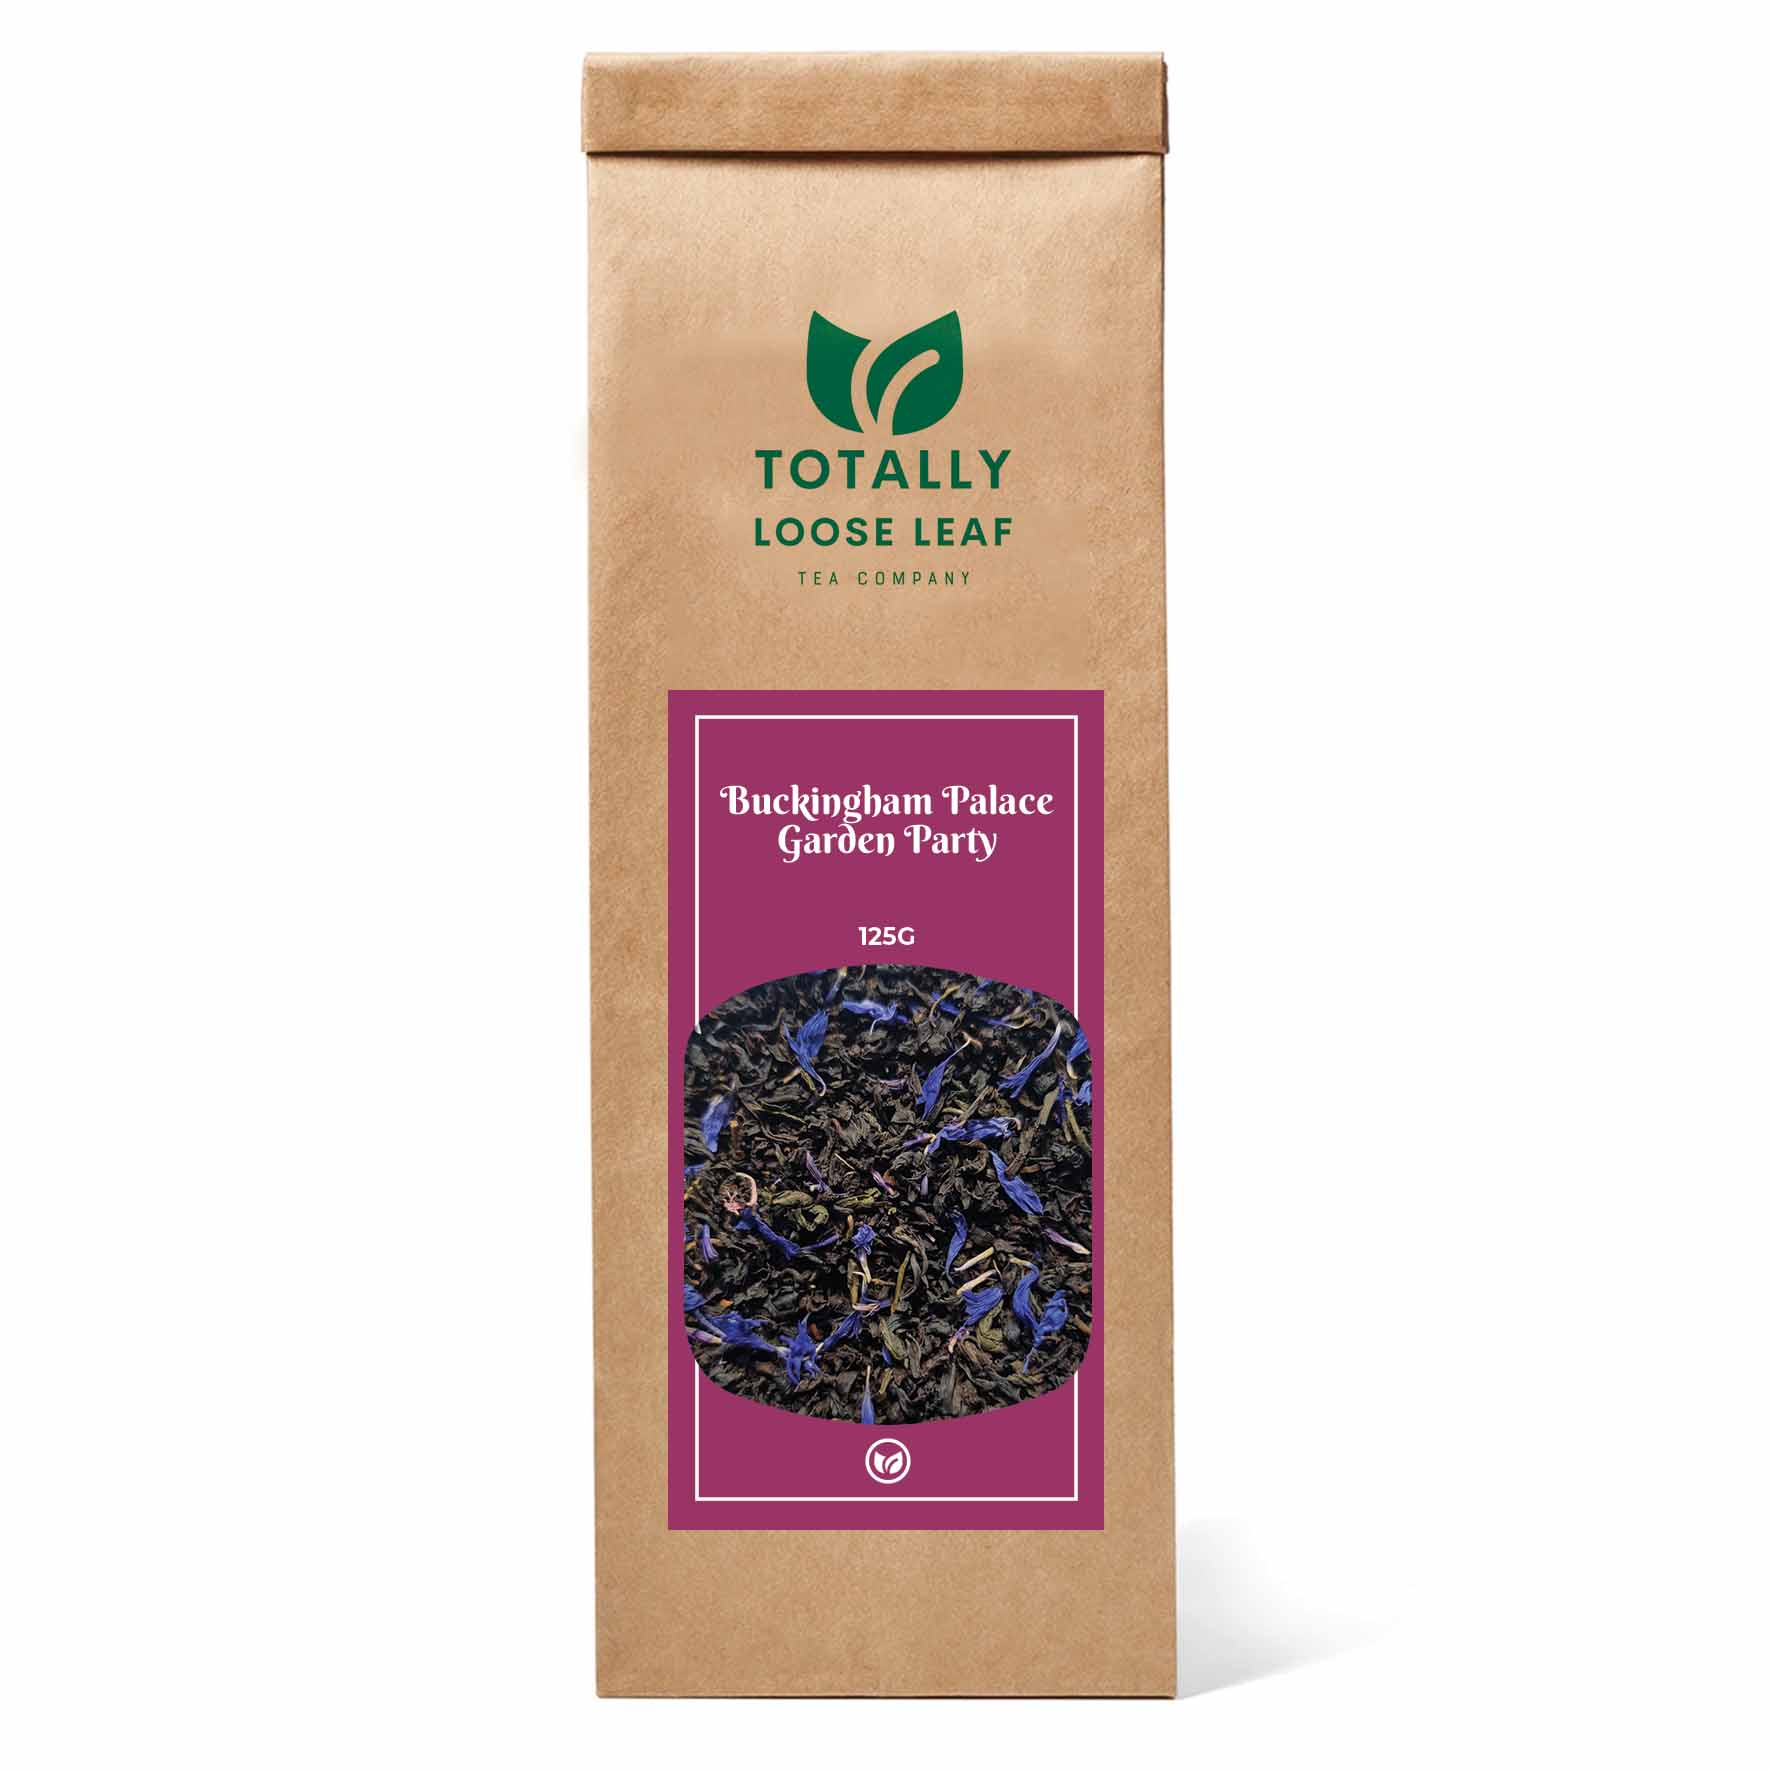 Buckingham Palace Garden Party Afternoon Loose Leaf Tea - one pouch